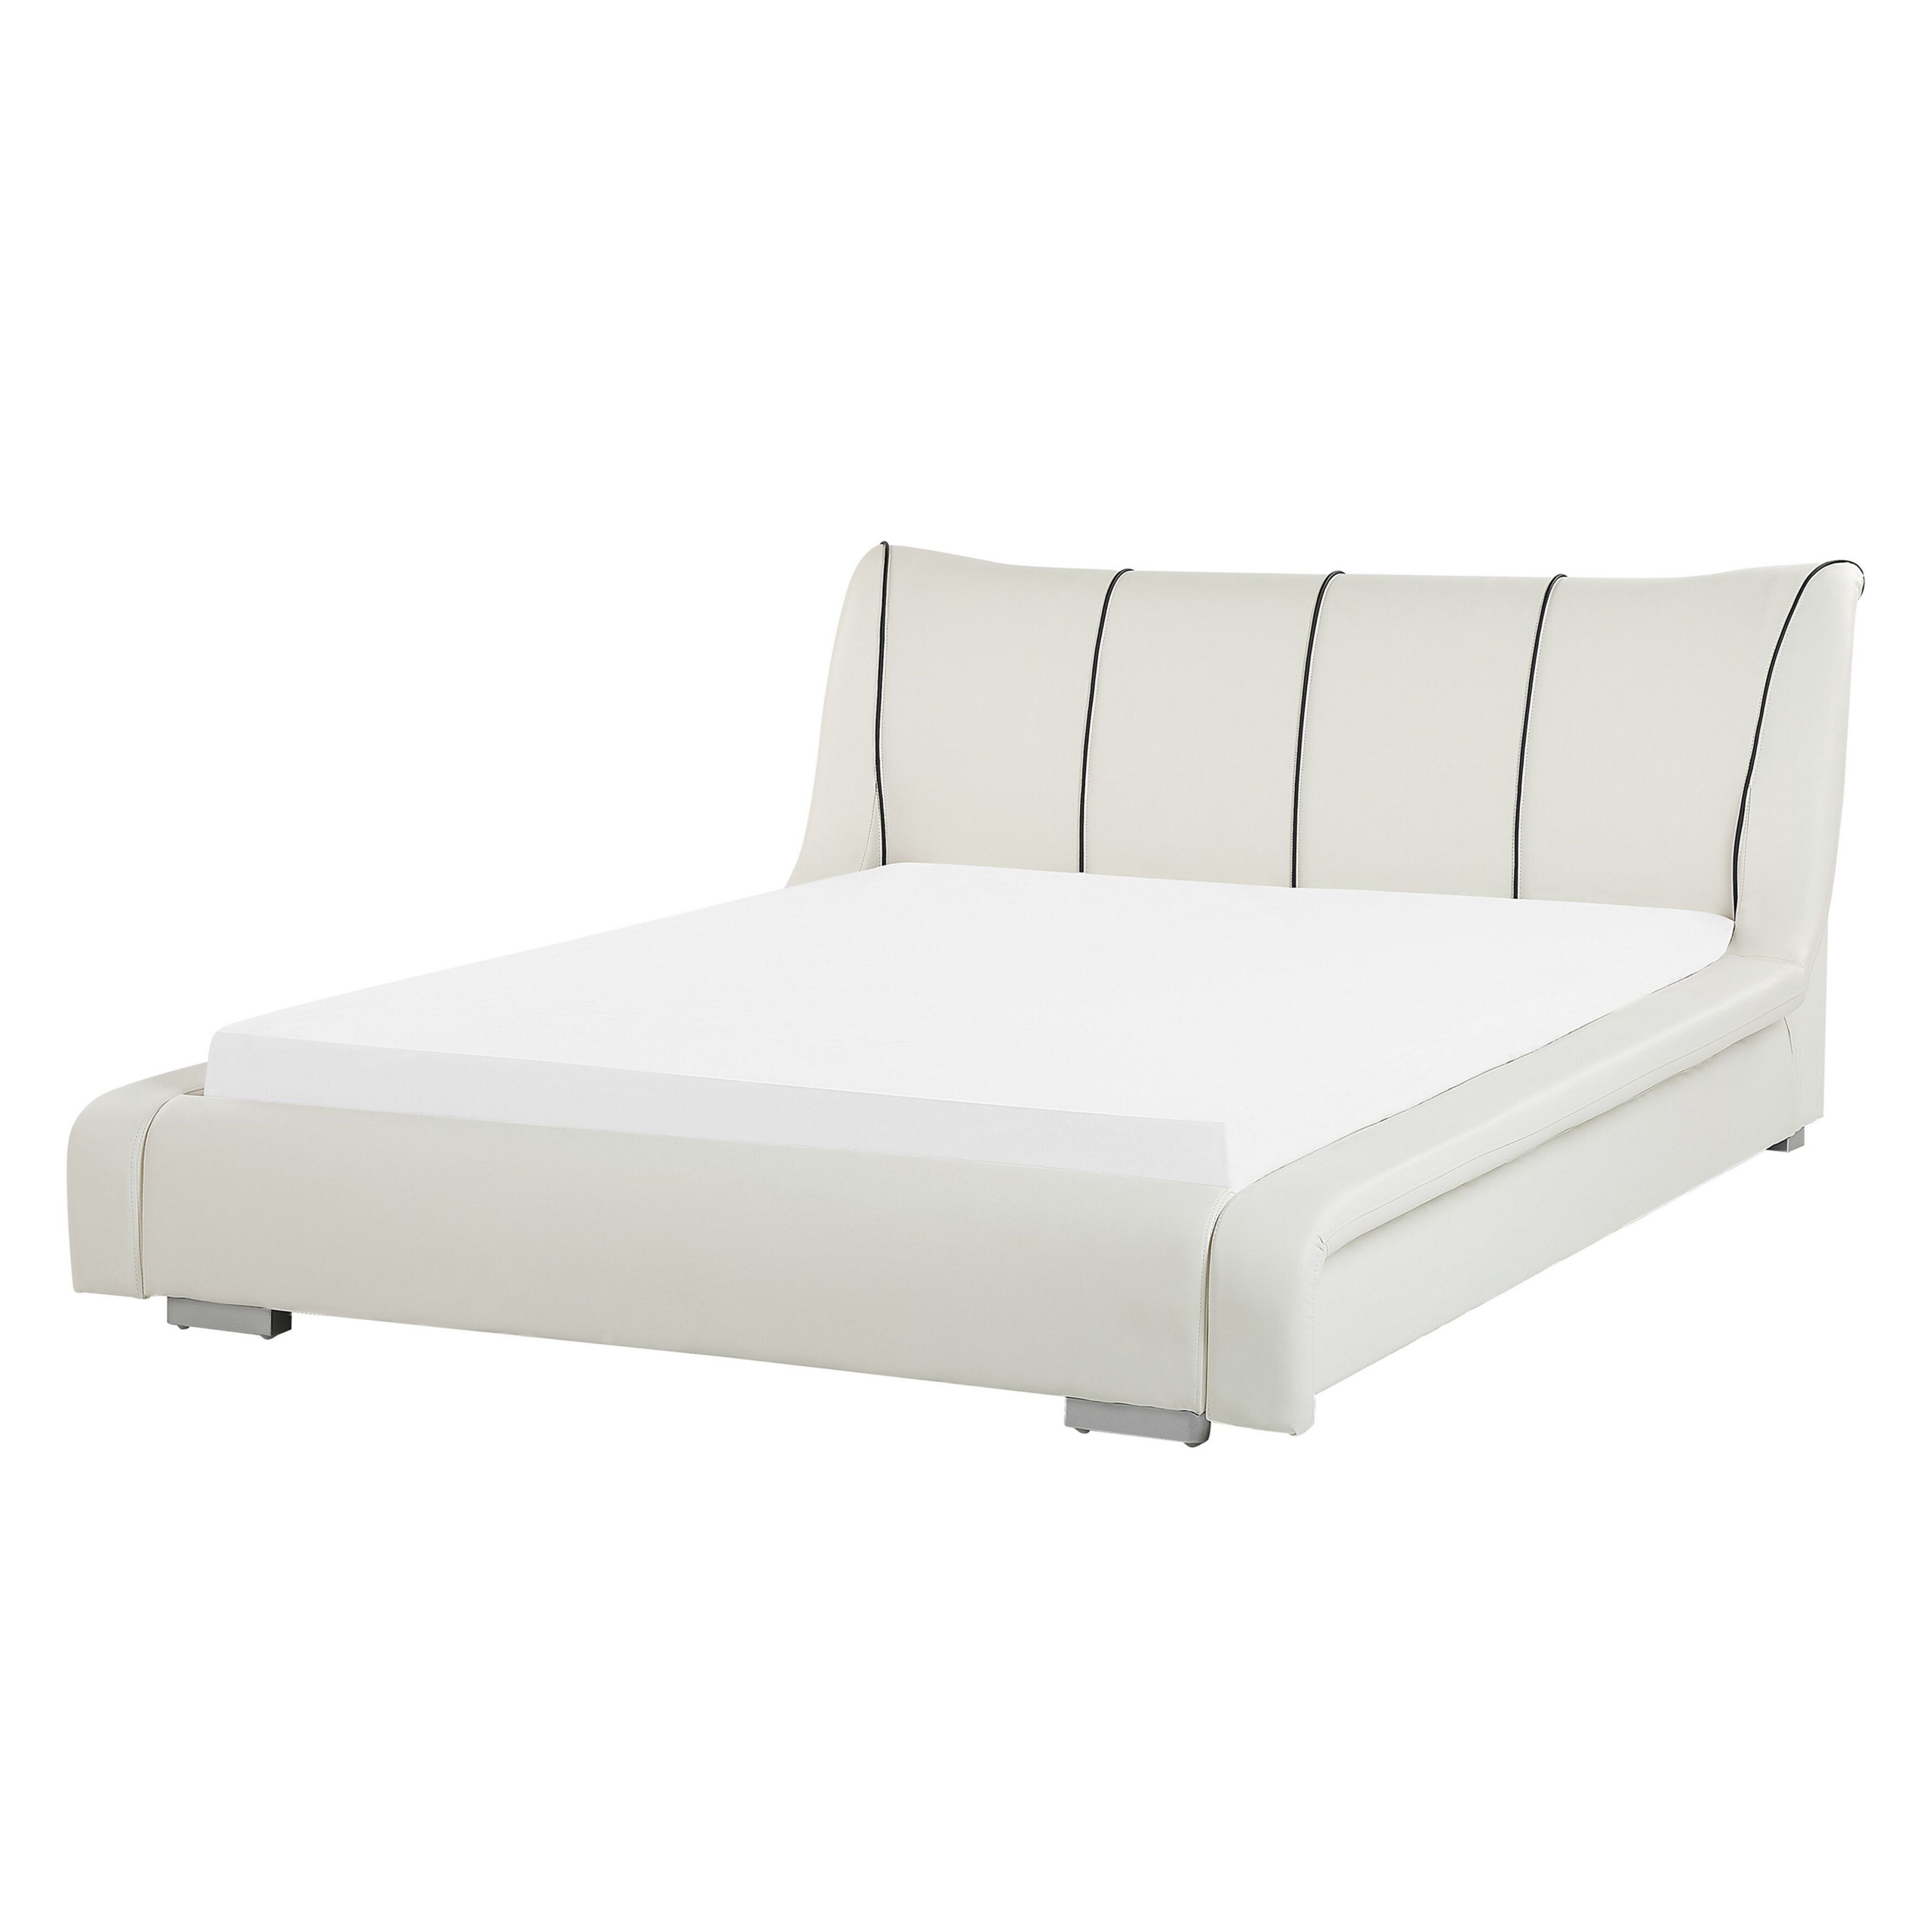 Beliani Waterbed White Leather EU King Size 5ft3 Accessories Wave Reduction Large Headboard Modern